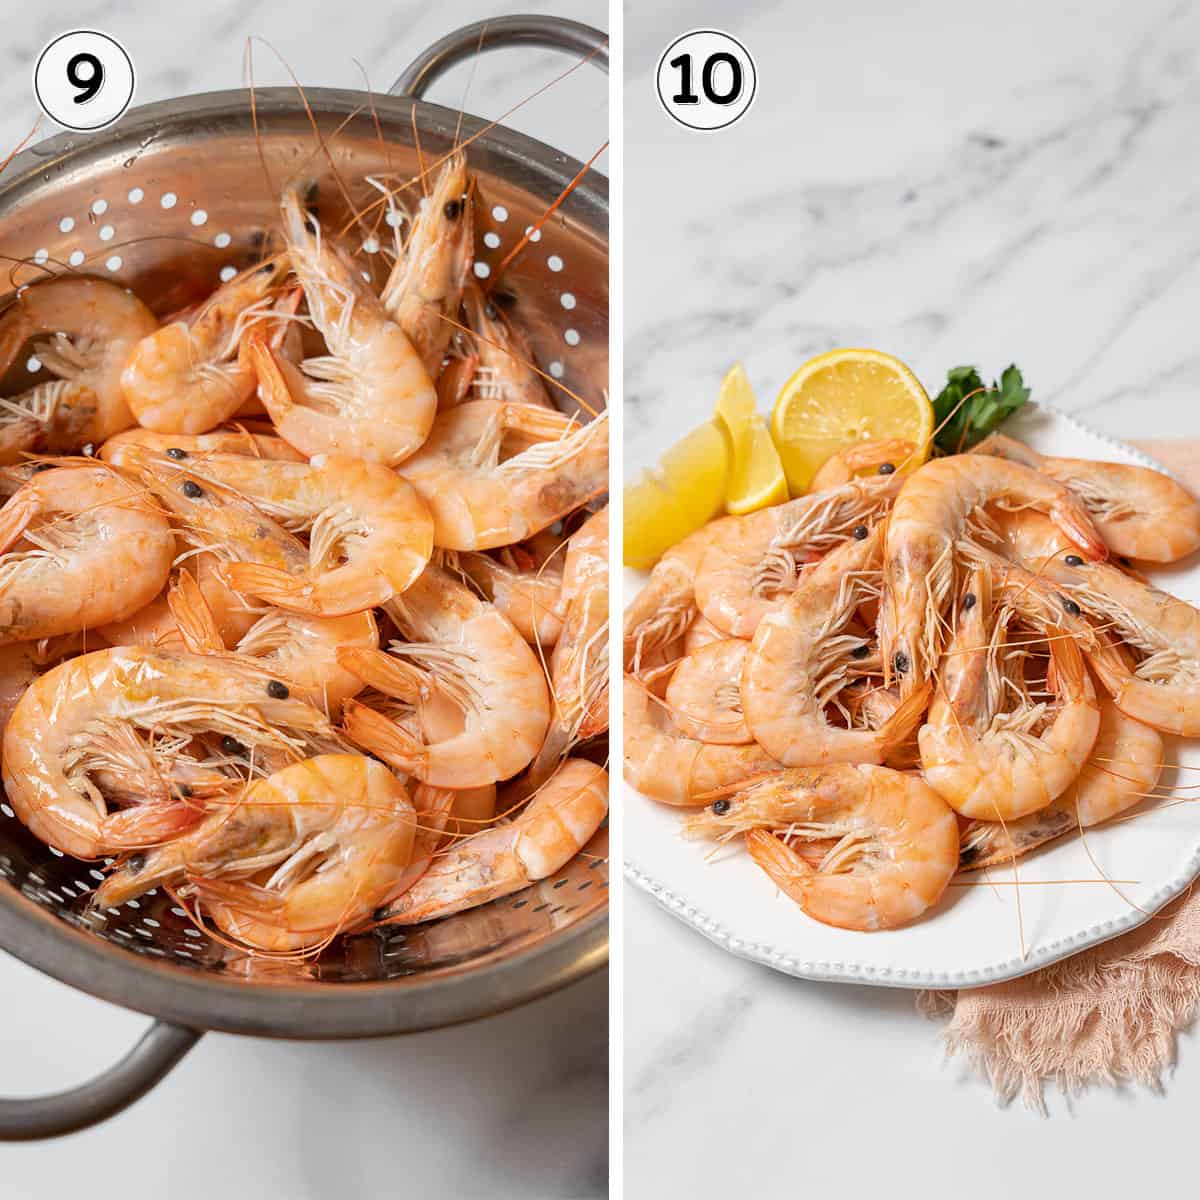 draining and serving the boiled shrimp on a white plate.